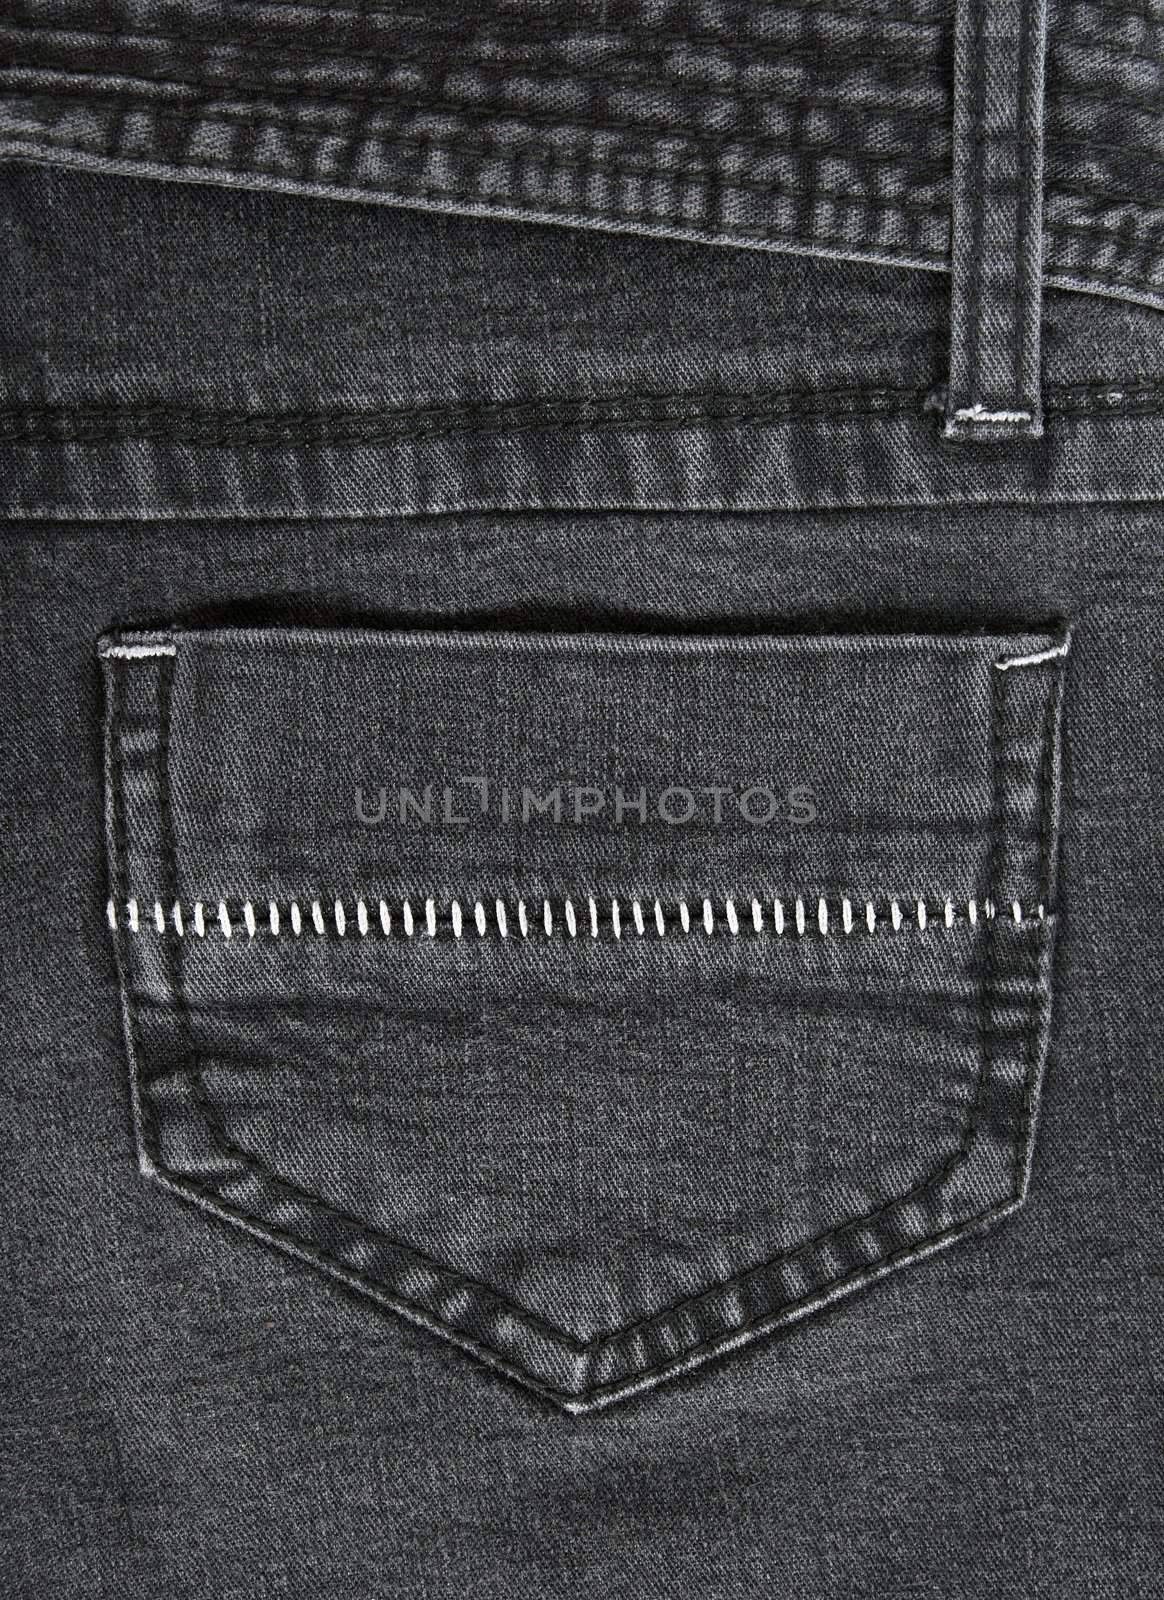 Closeup of black jeans pocket with white stitches.